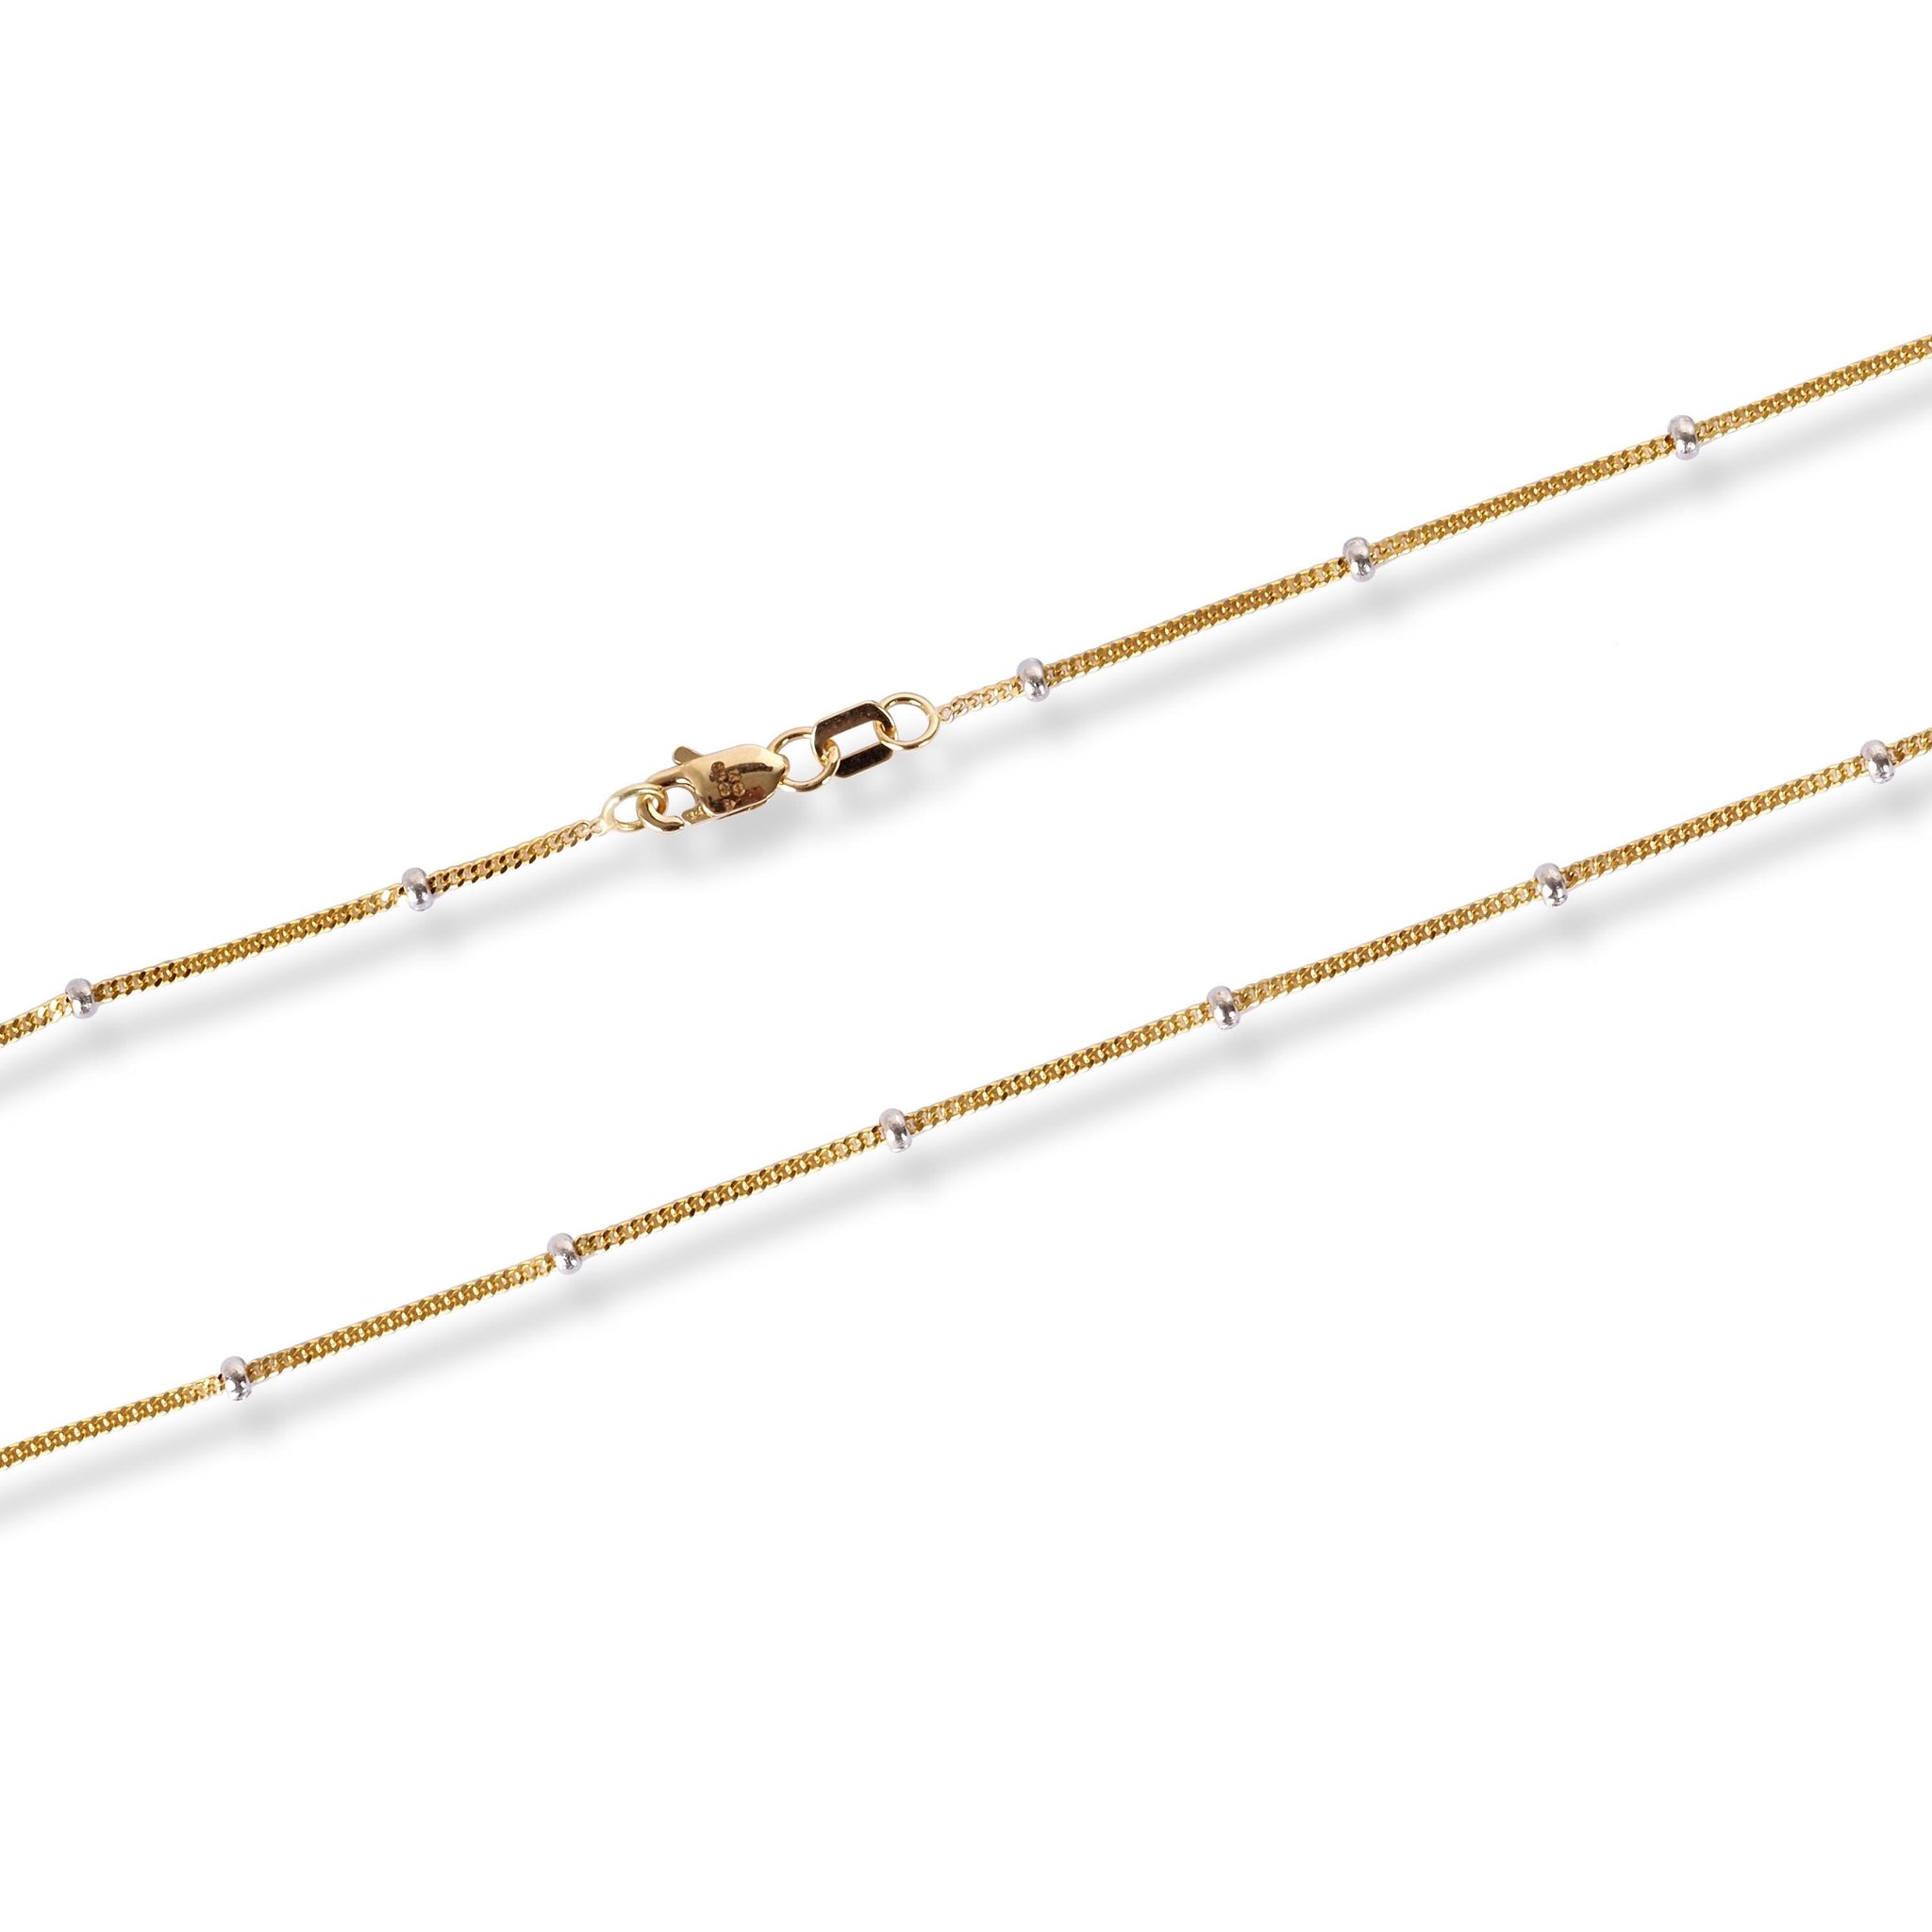 18ct Yellow Gold Chain with Rhodium Plated Beads and Lobster Clasp C-38900